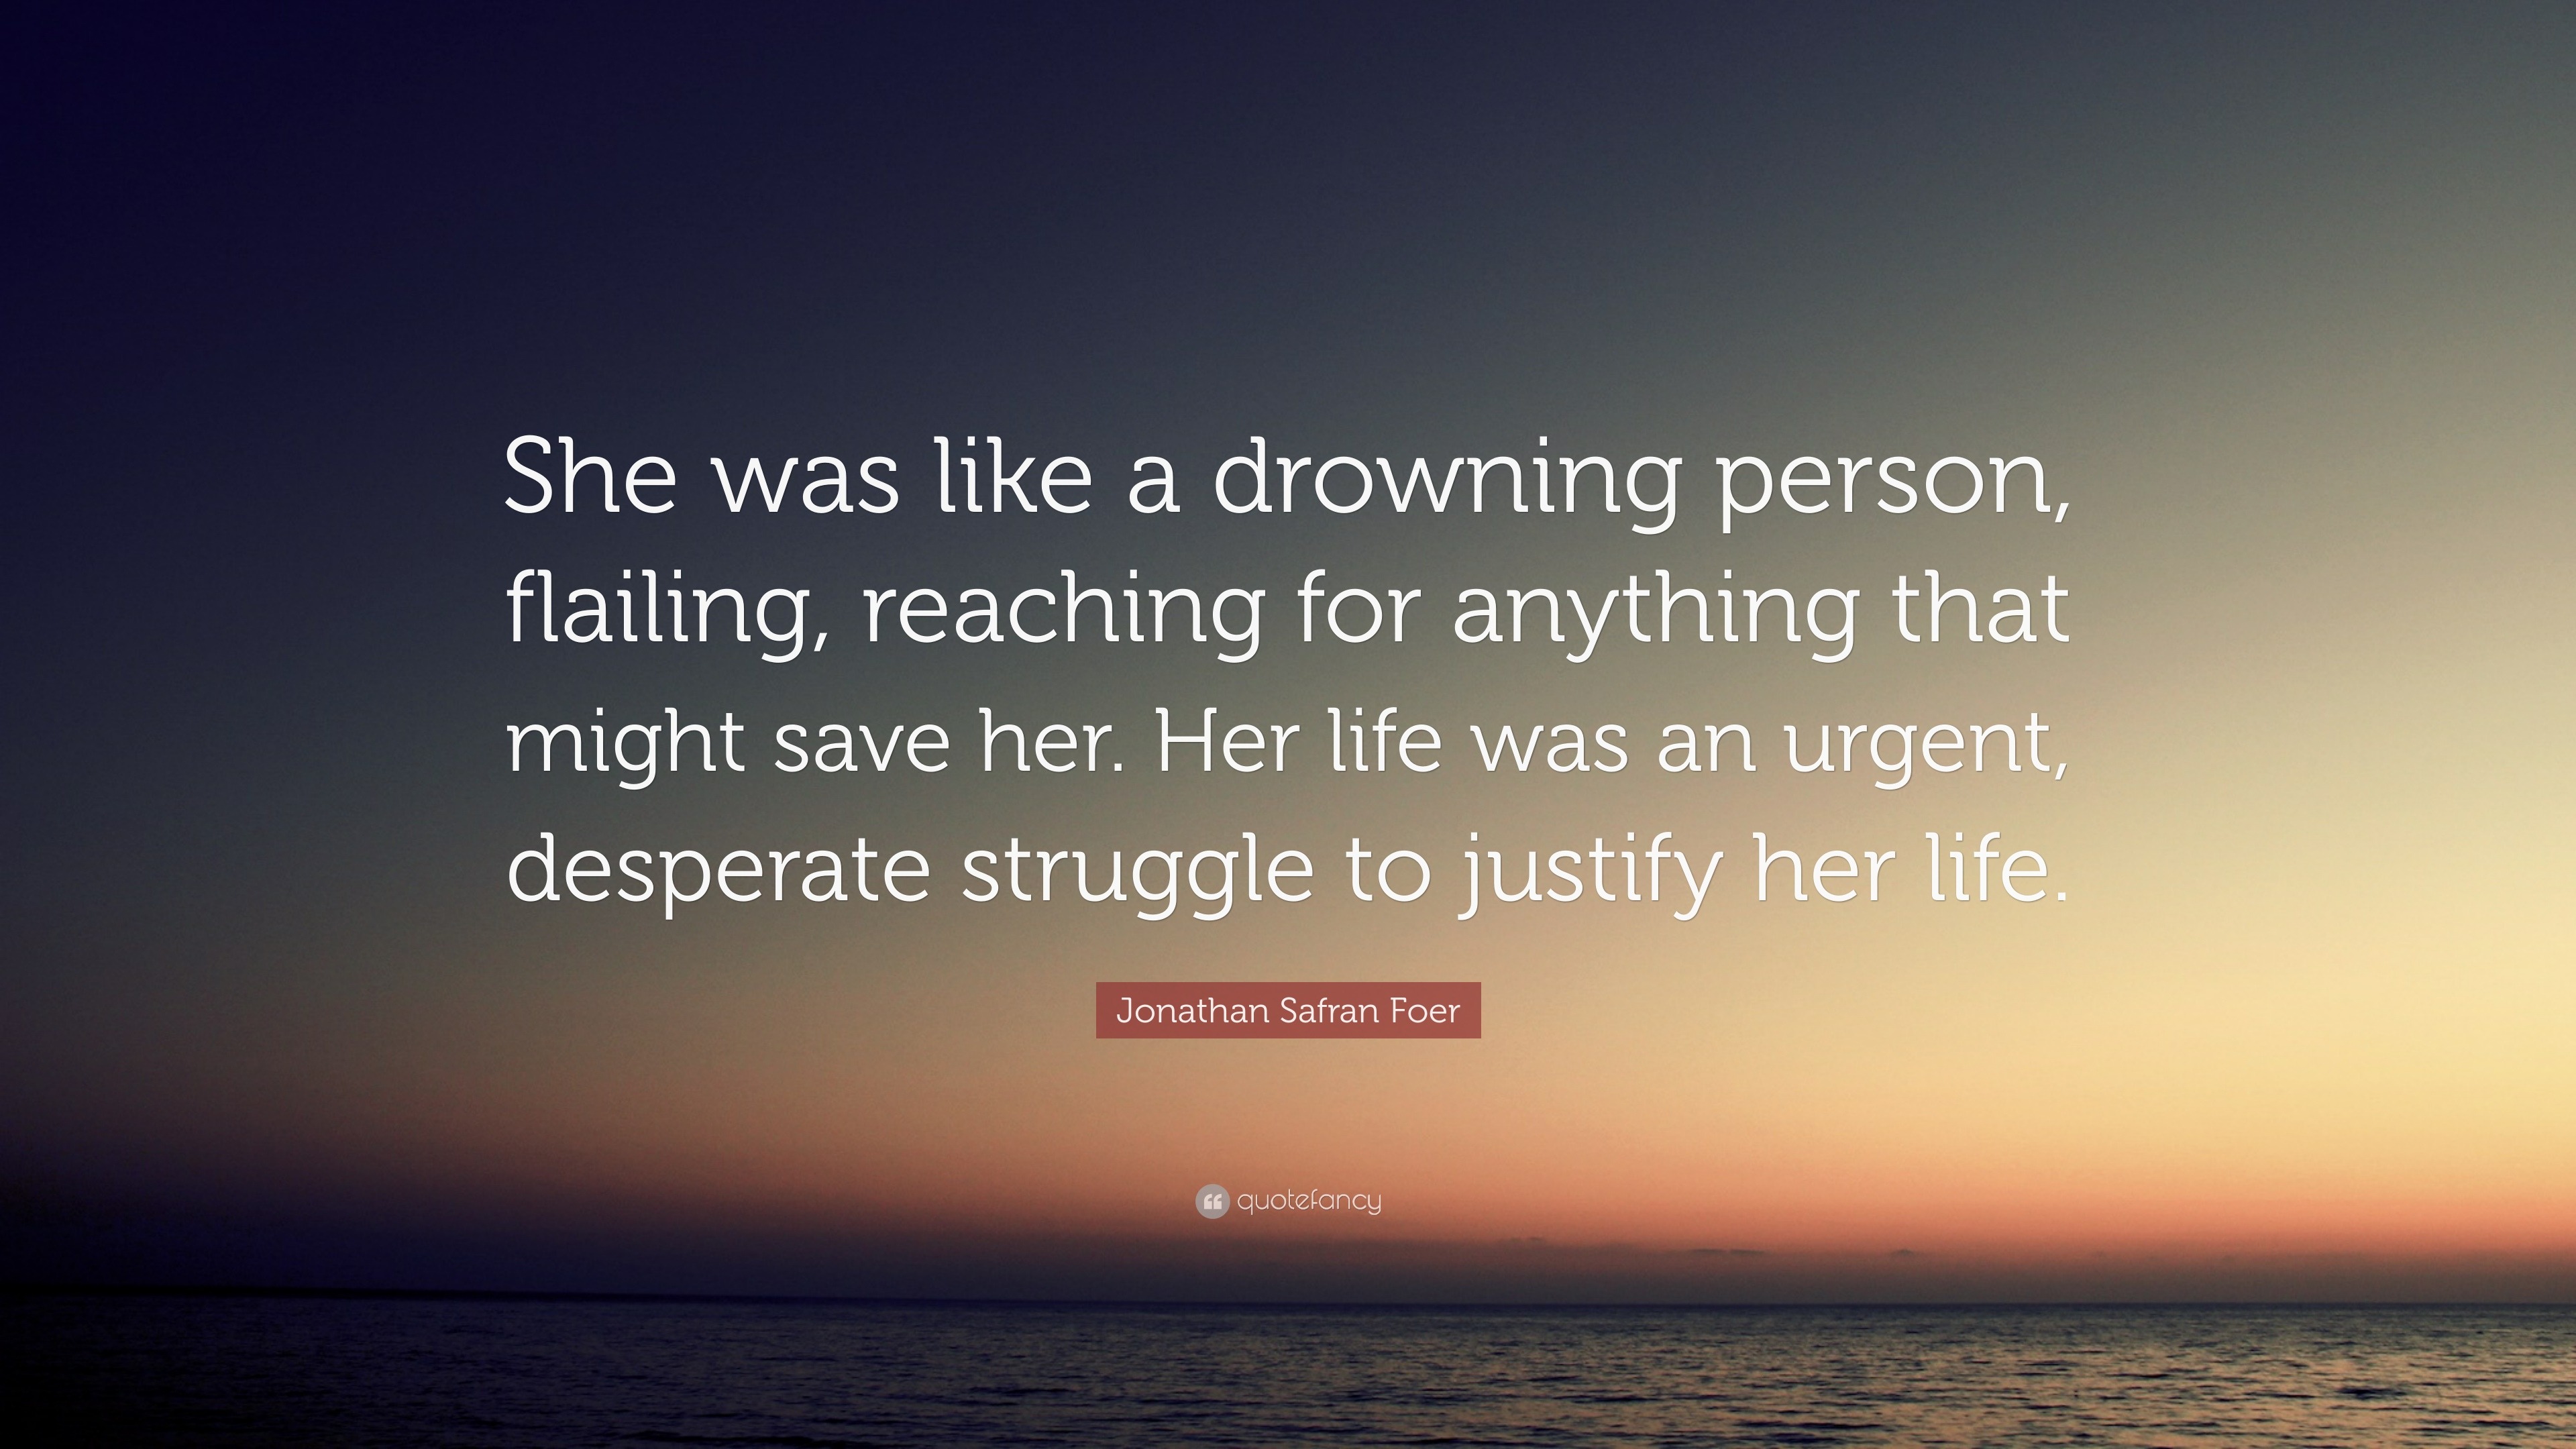 Jonathan Safran Foer Quote: “She was like a drowning person, flailing ...